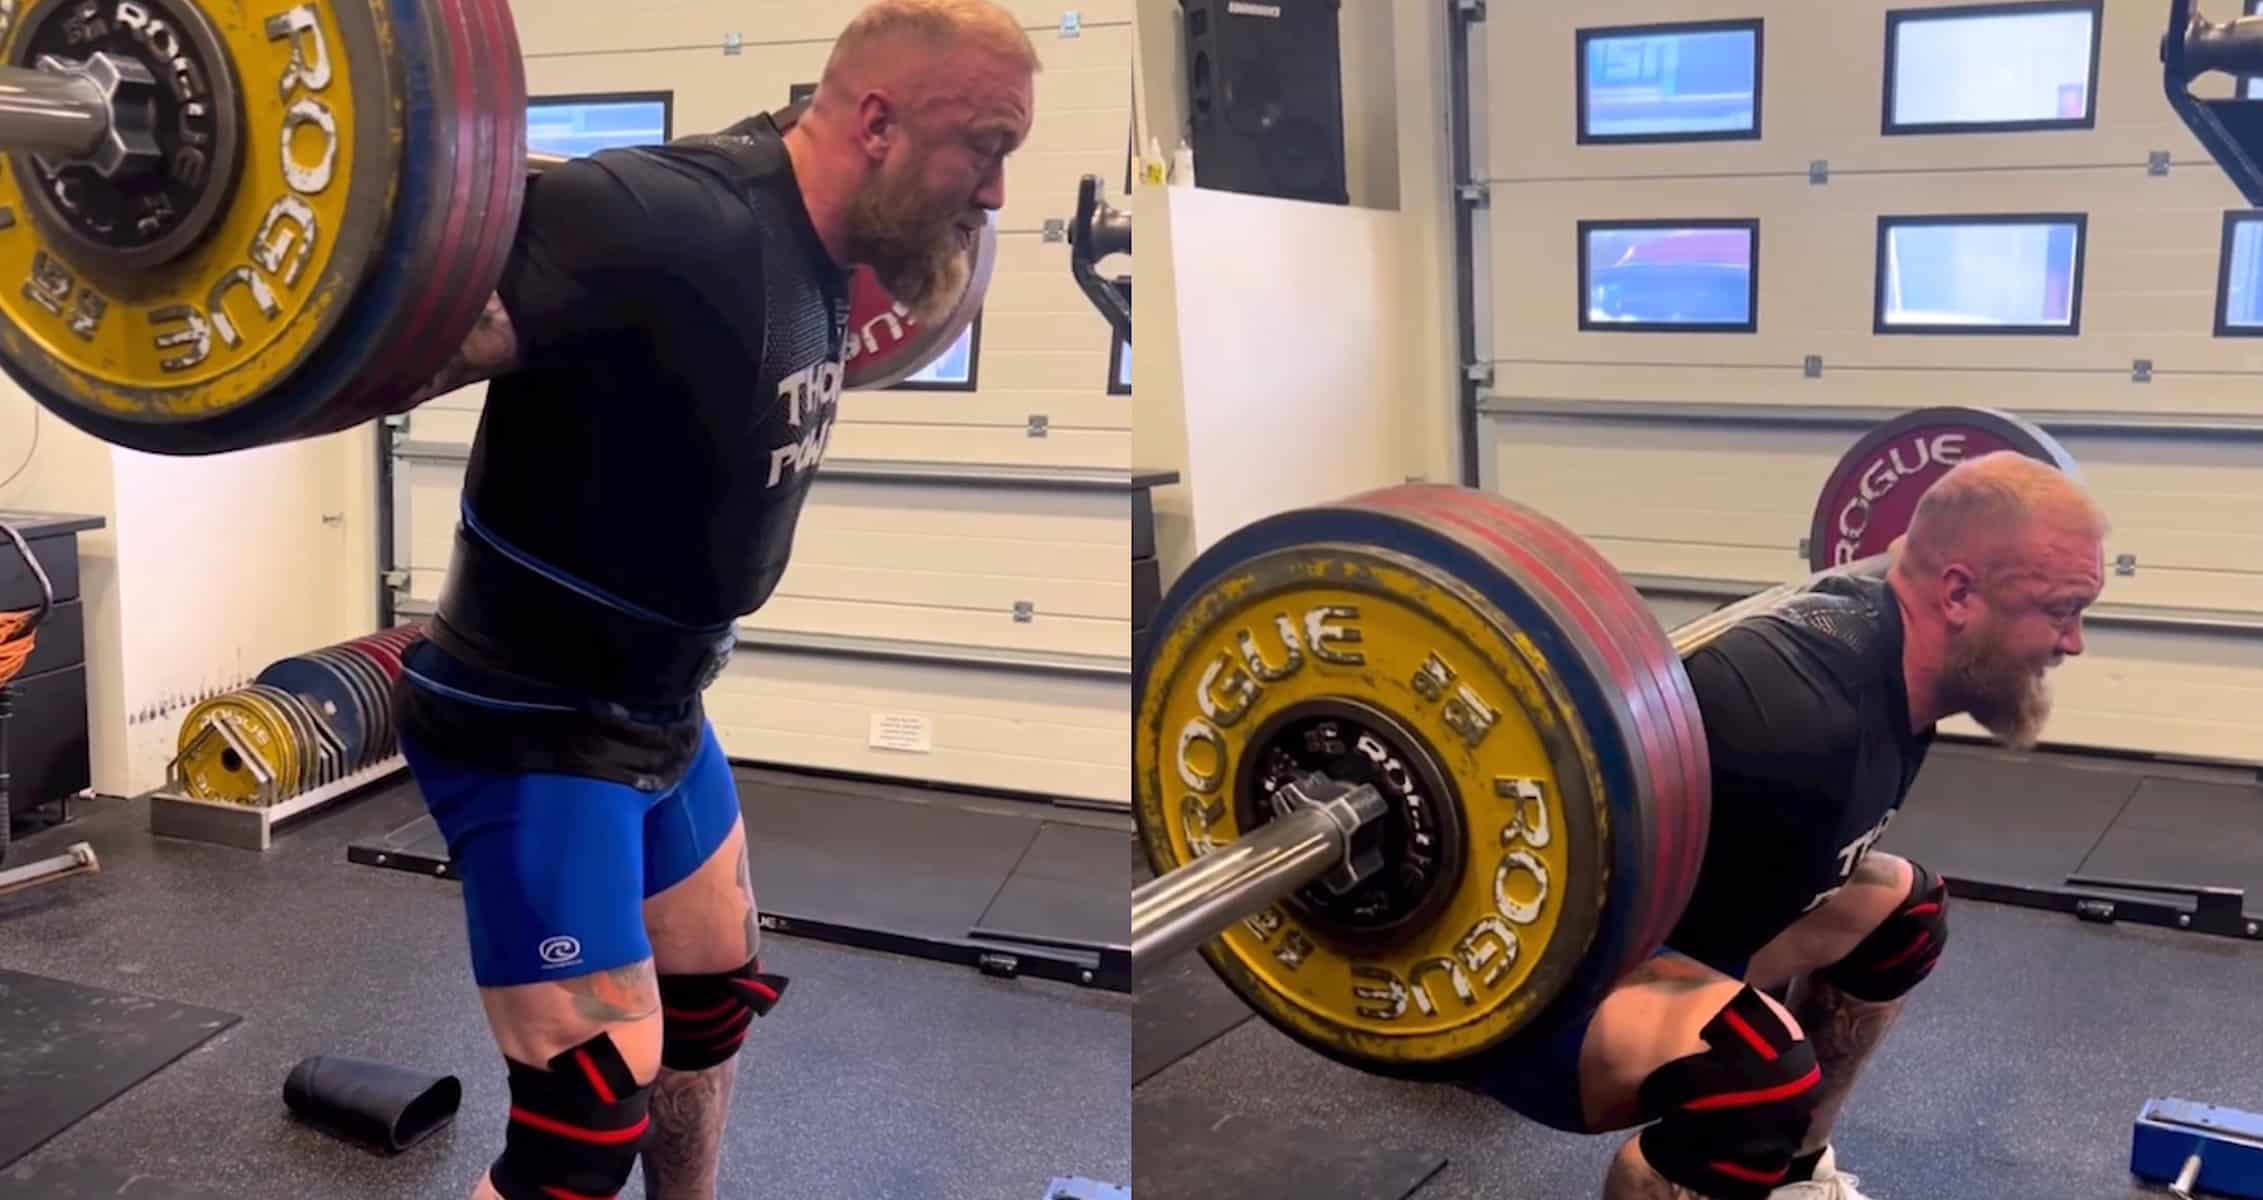 Hafthor Bjornsson a.k.a The Mountain, Squats 300 kg (661 lb) for Two Reps